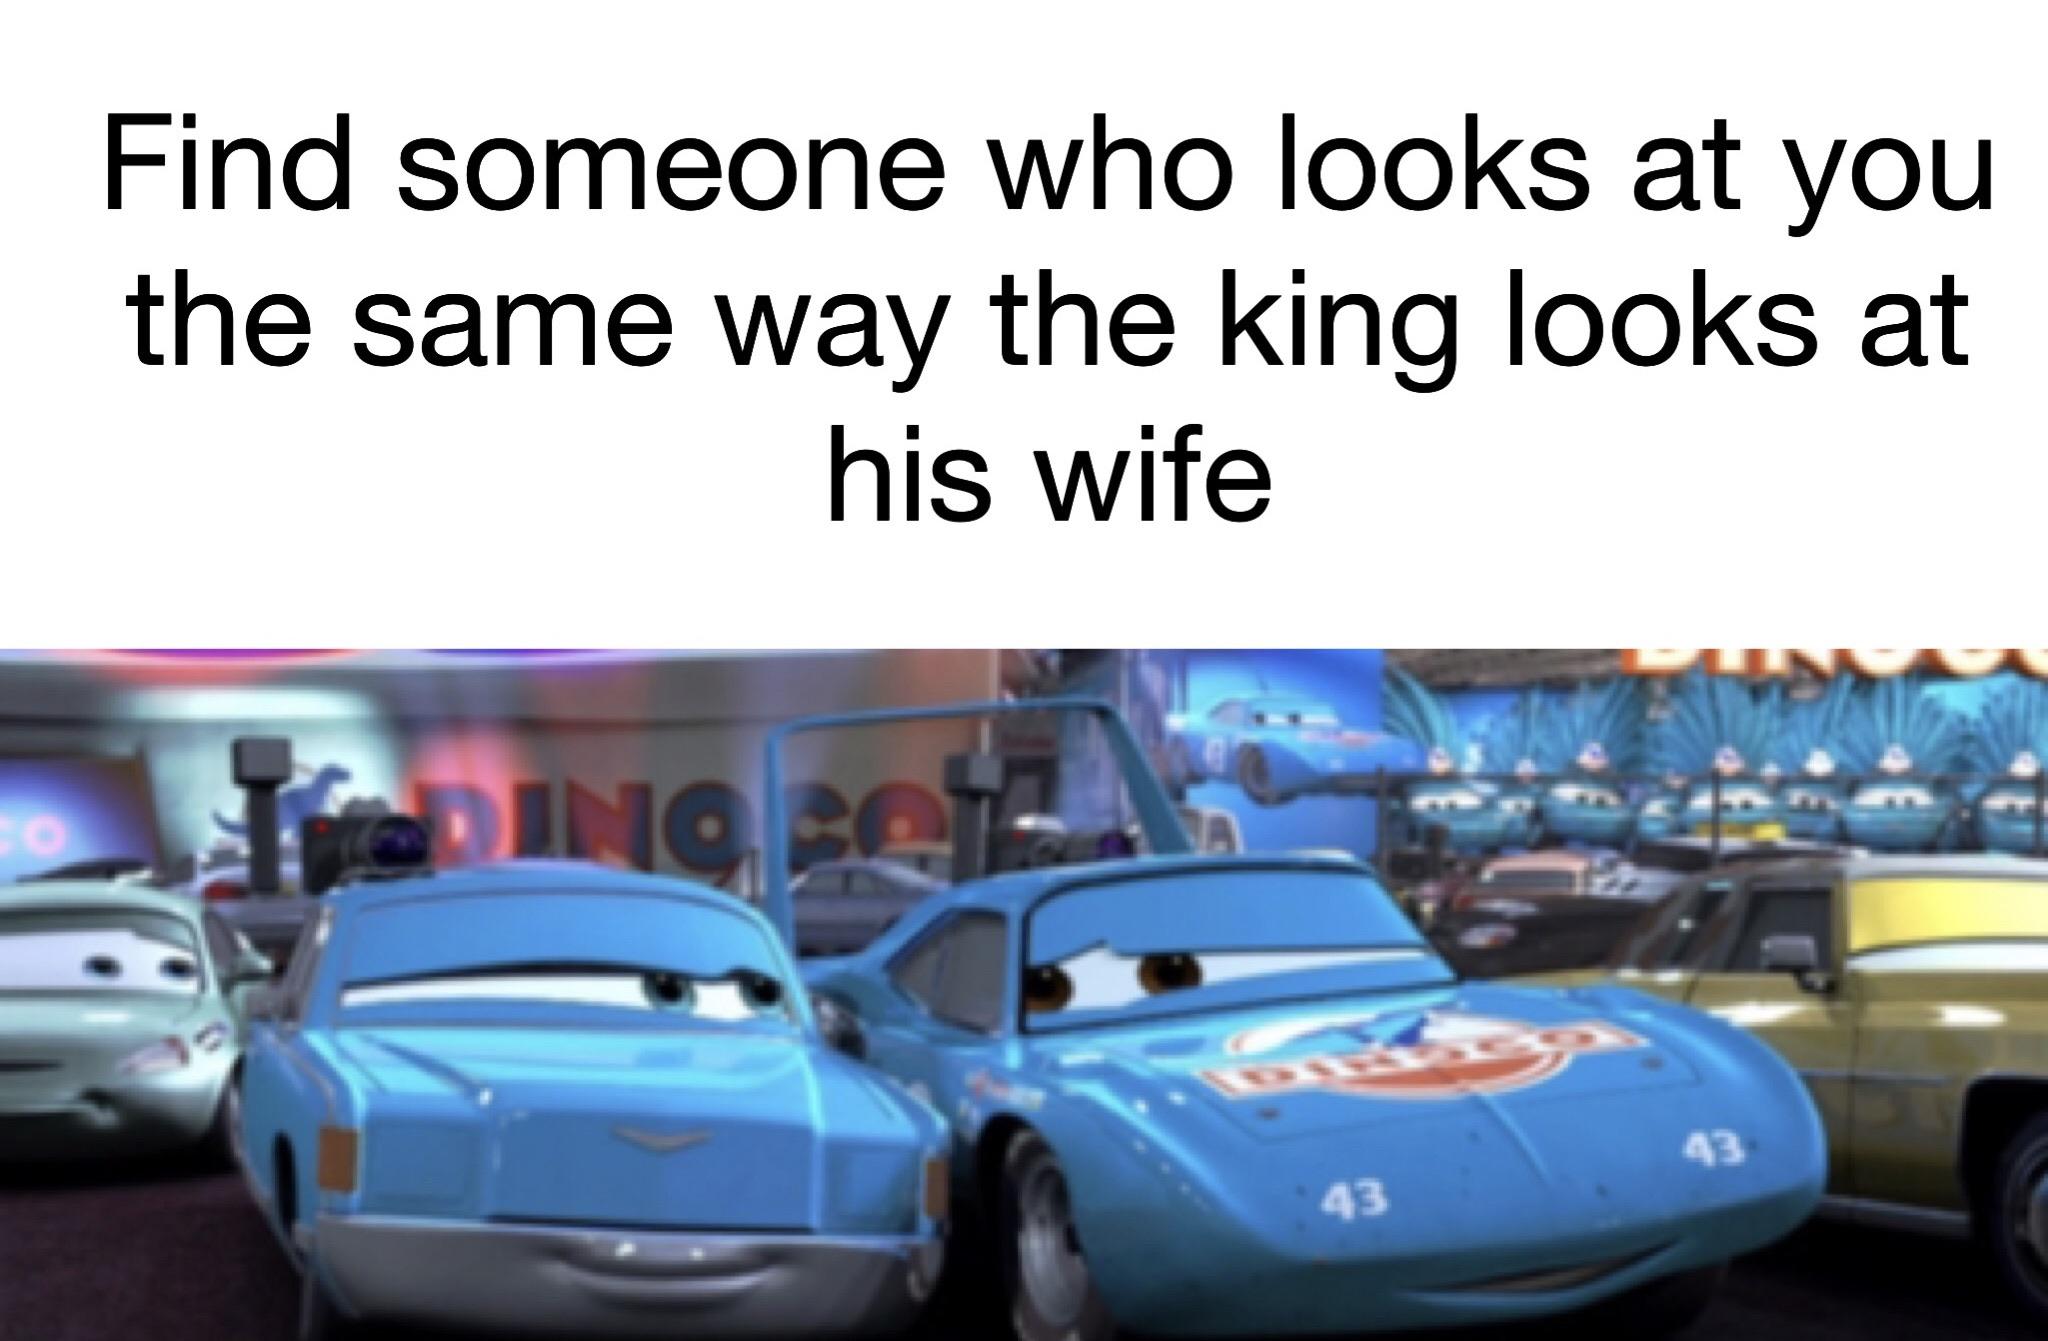 Cute, wholesome memes, Cars, Richard Petty, Lynda Petty, The King, Richard Wholesome Memes Cute, wholesome memes, Cars, Richard Petty, Lynda Petty, The King, Richard text: Find someone who looks at you the same way the king looks at his wife 